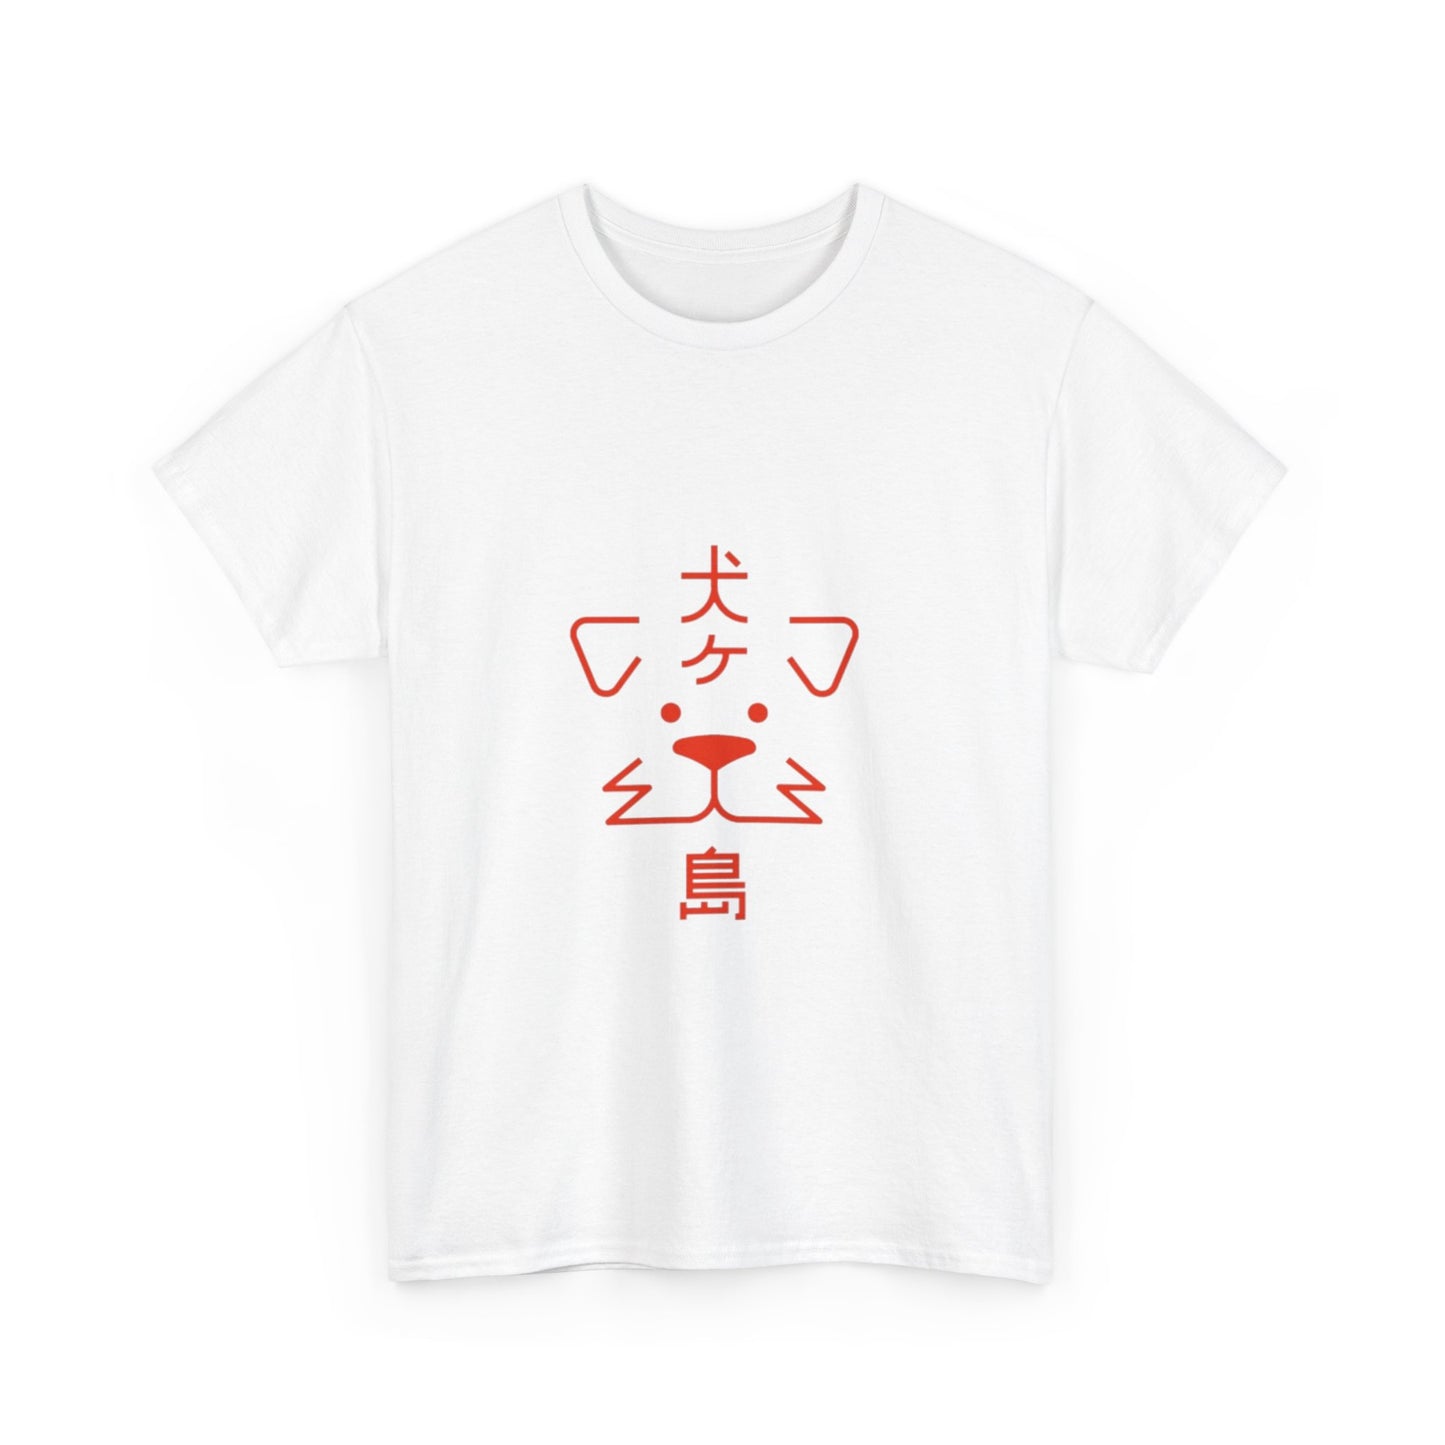 Wes Anderson - Isle of Dogs Printed T-Shirt